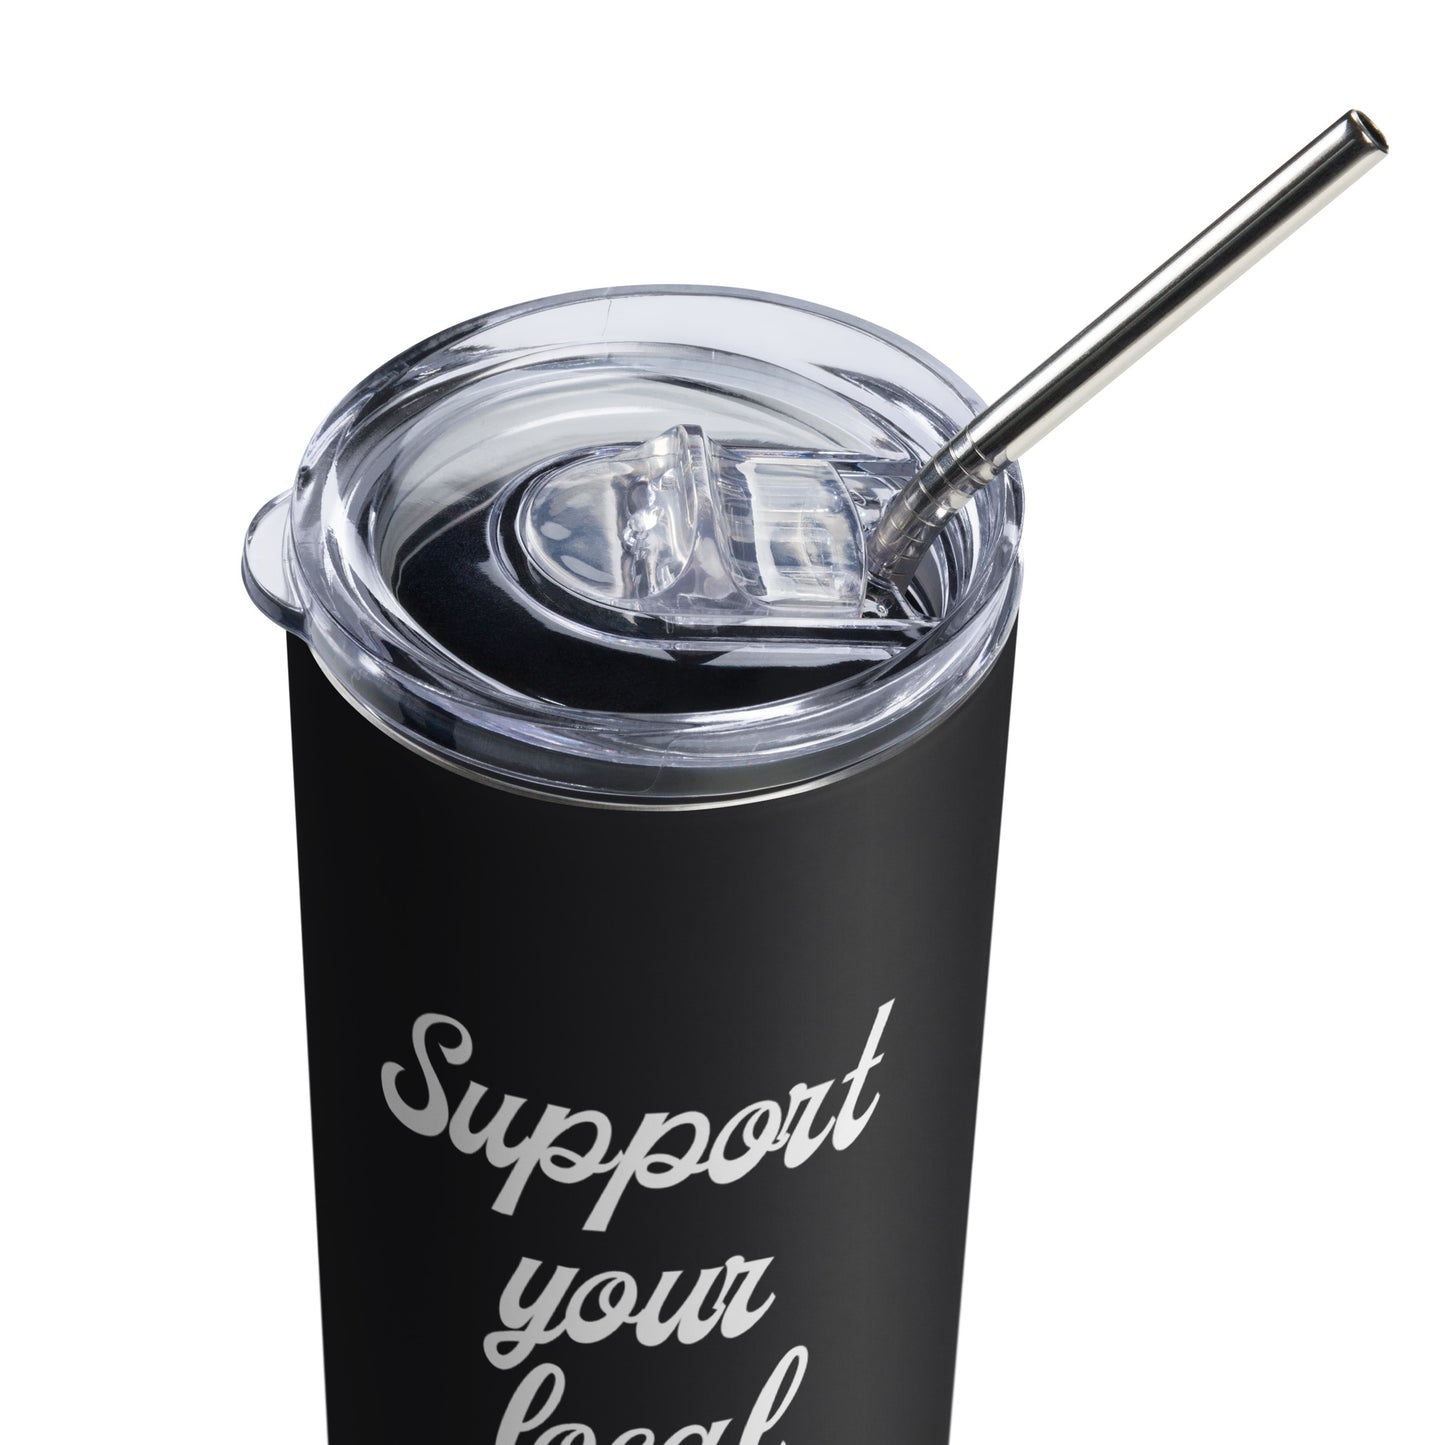 Support Your Local Grants Manager Stainless steel tumbler